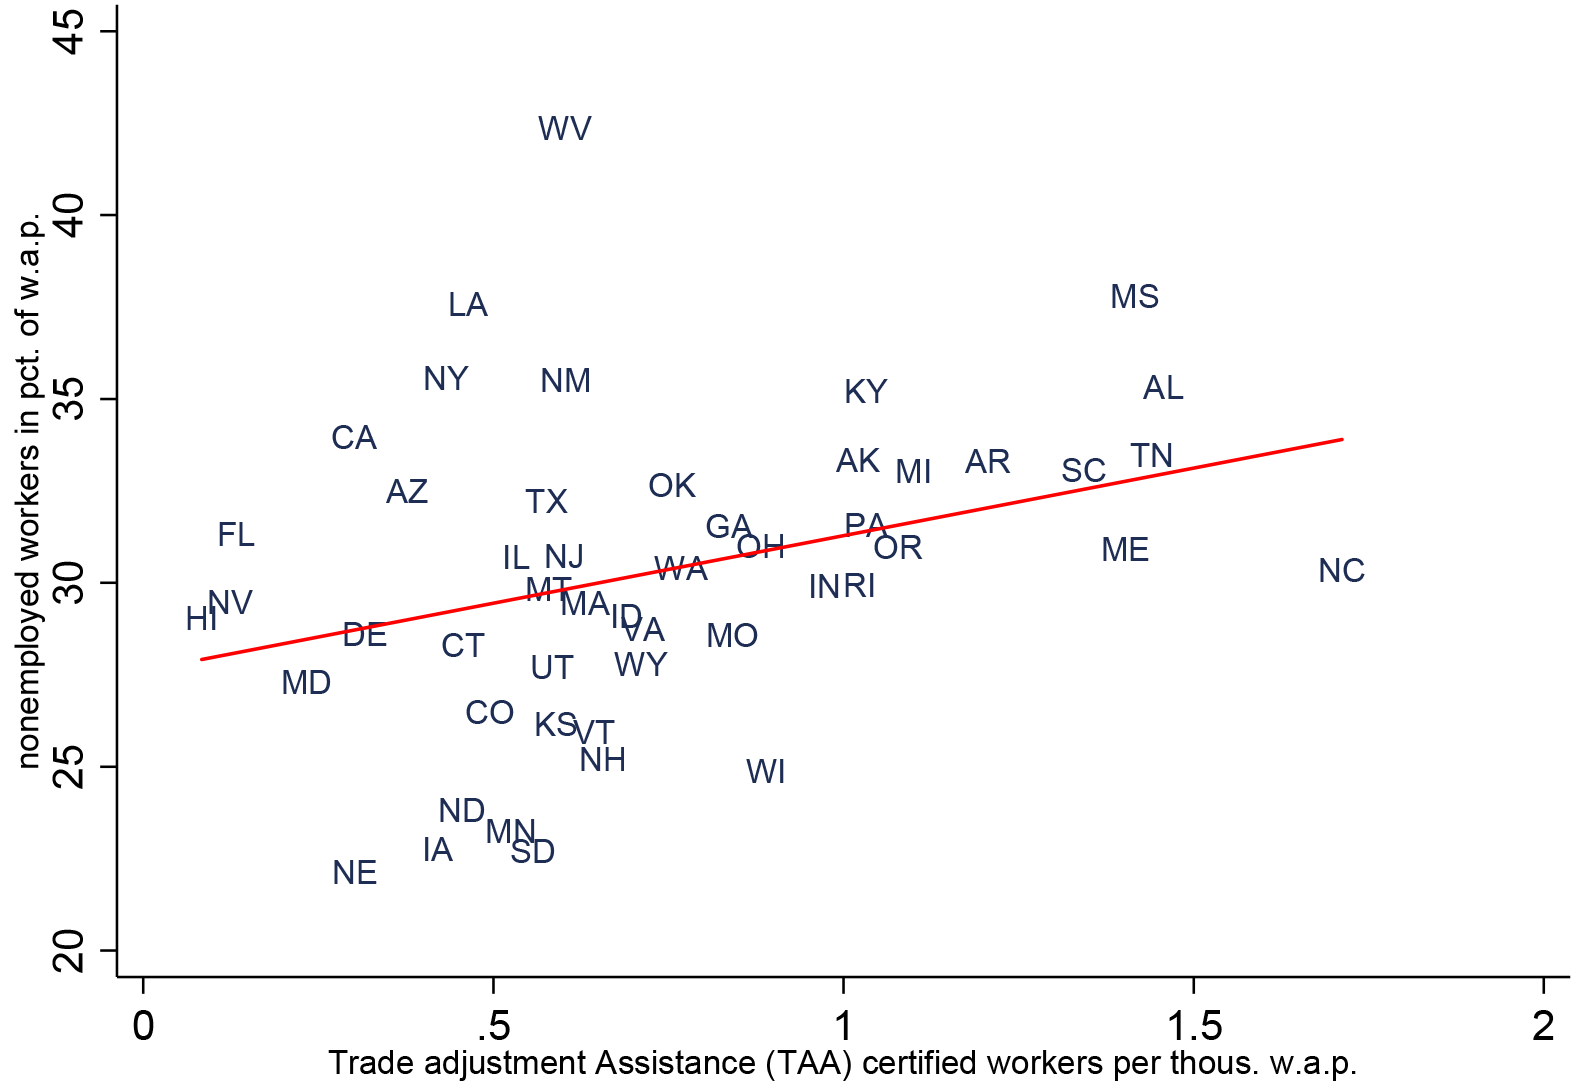 Figure 3: Nonemployment and TAA certifications in the U.S. (1989-2009). See accessible link for data.